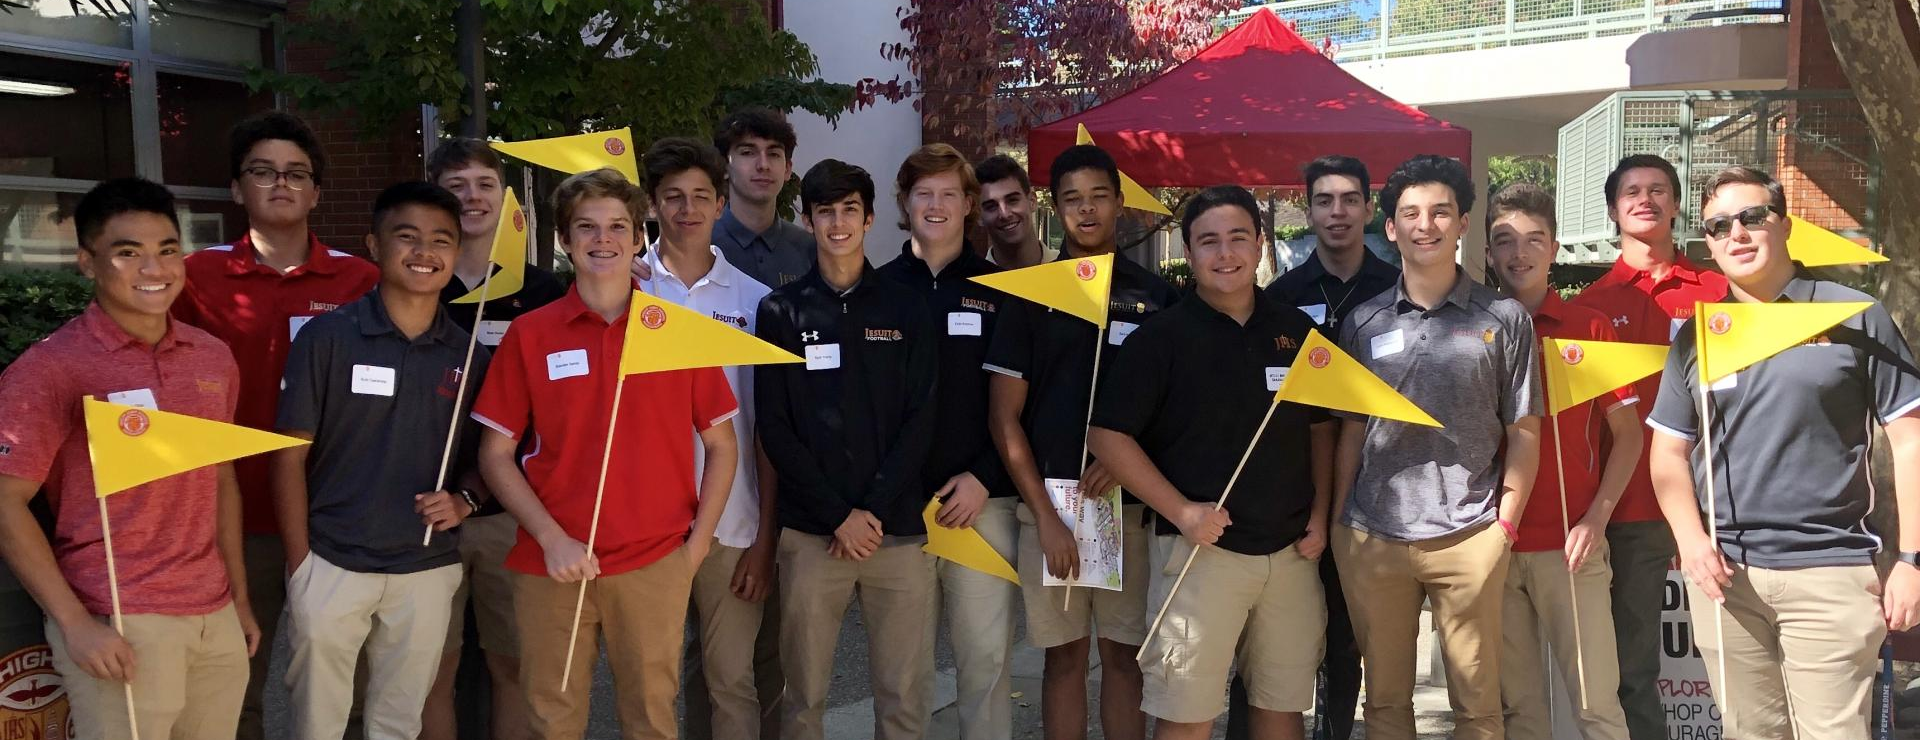 Group of student Open House tour guides with their bright yellow flags on poles.